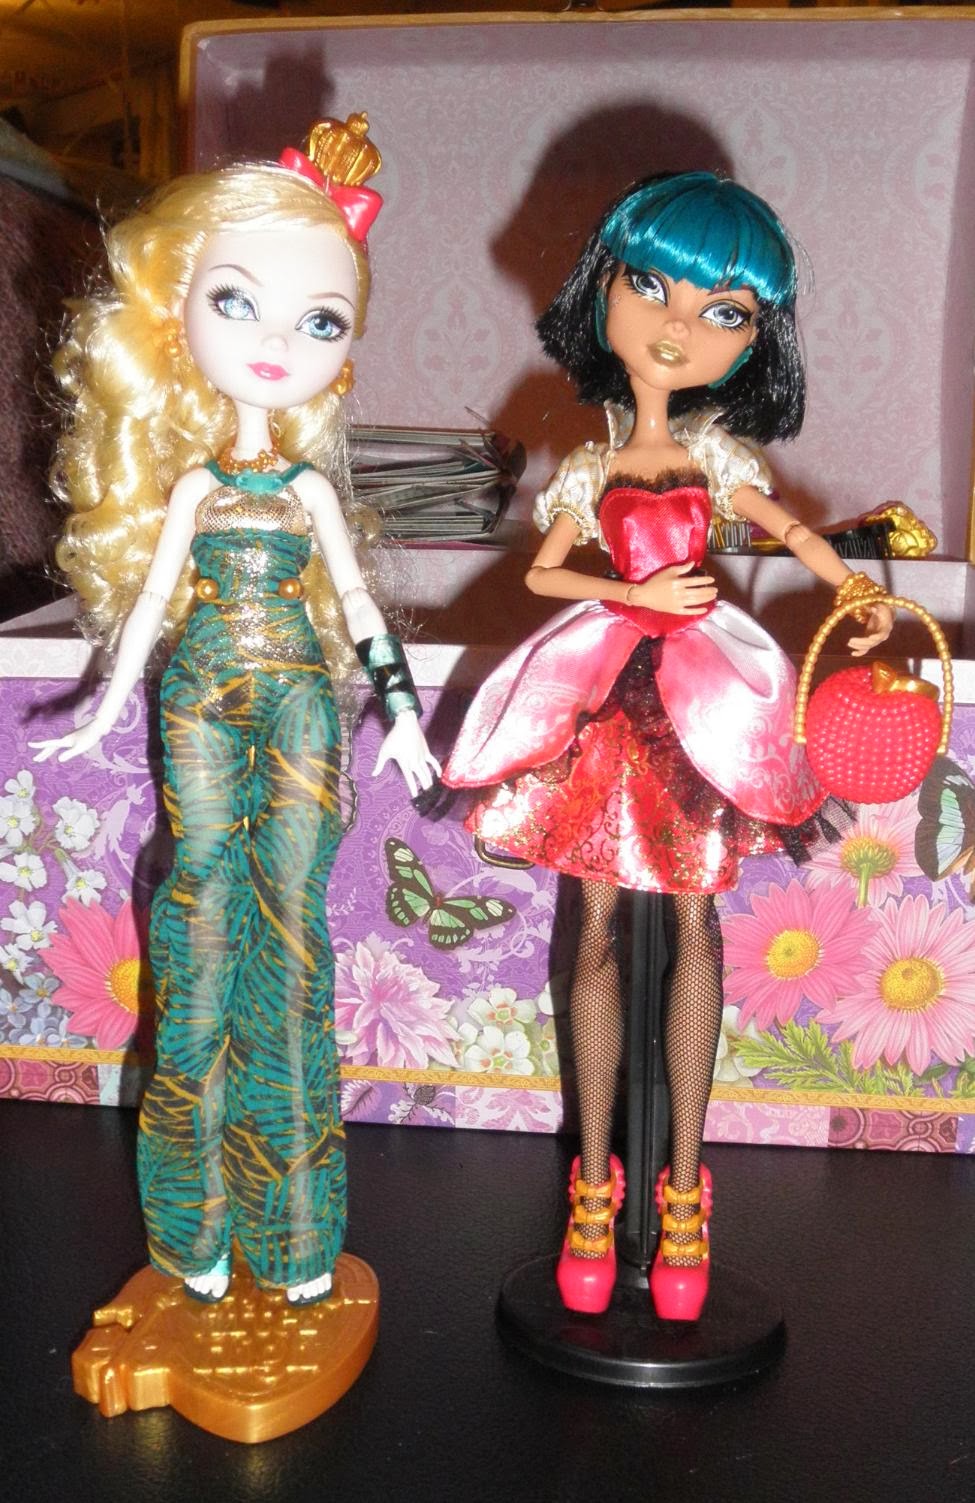 Jupiter's Closet: Comparing Ever After High to Monster High Doll